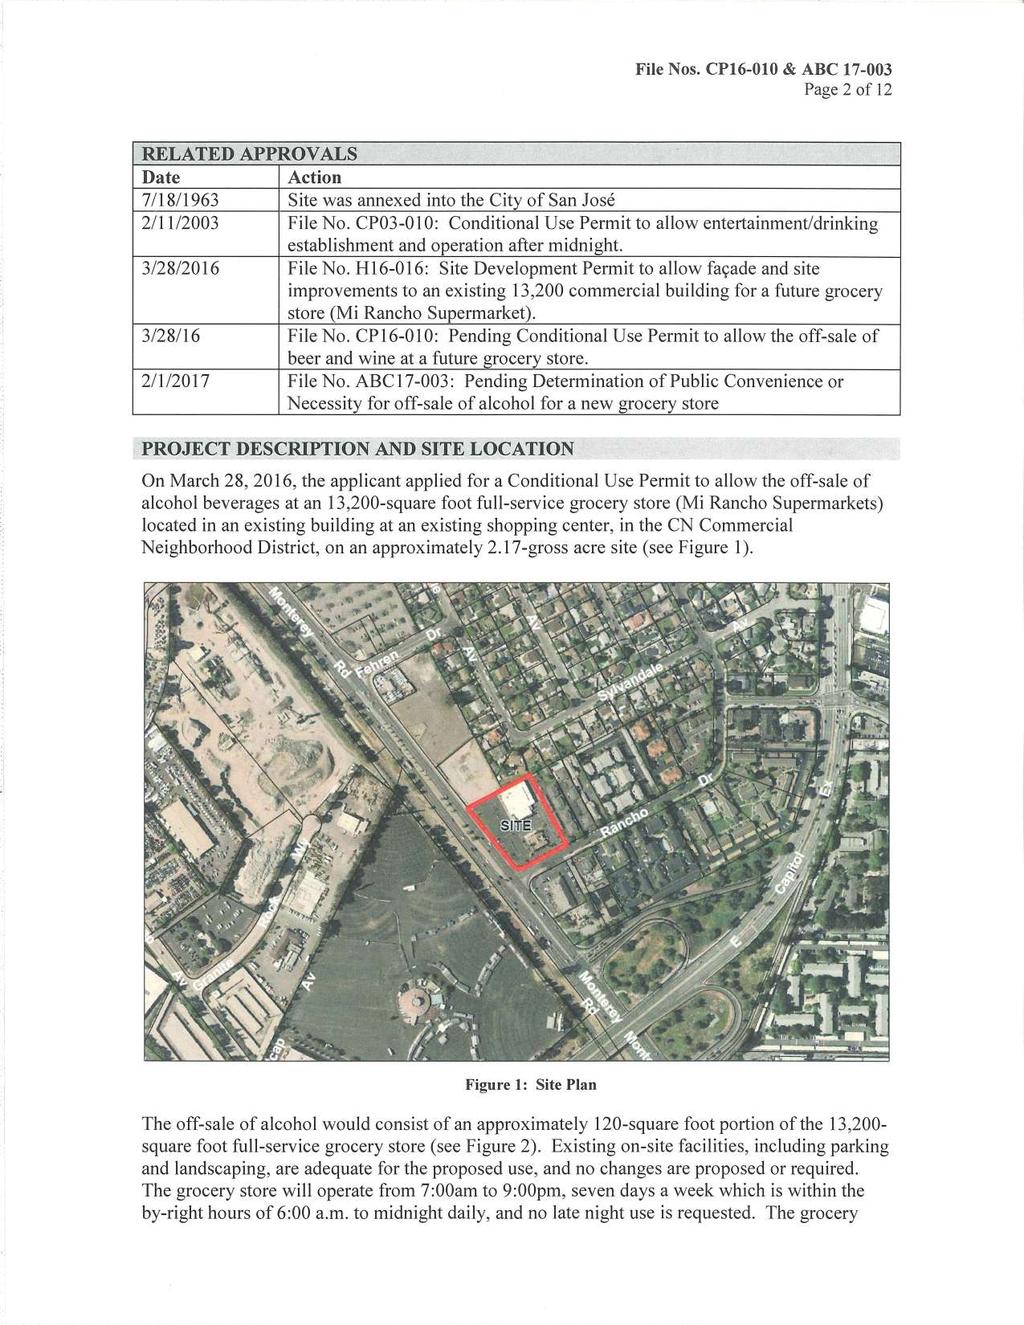 File Nos. CP16-010 & ABC 17-003 Page 2 of 12 RELATED APPROVALS Date Action 7/18/1963 Site was annexed into the City of San Jose 2/11/2003 File No.